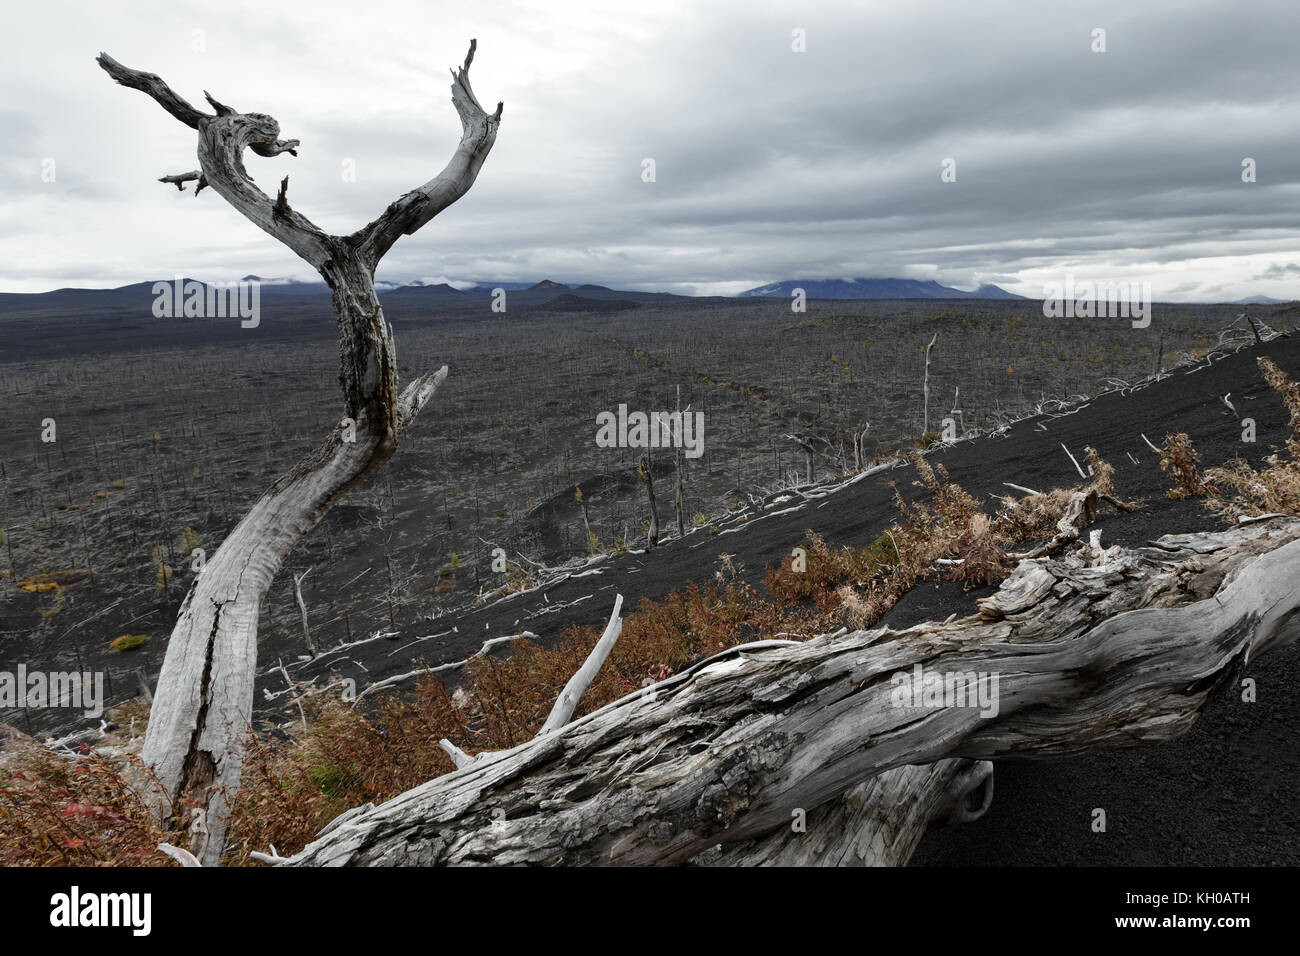 Volcano landscape on Kamchatka Peninsula: Dead Forest - consequence of natural disaster - catastrophic eruptions Plosky 'Flat' Tolbachik Stock Photo